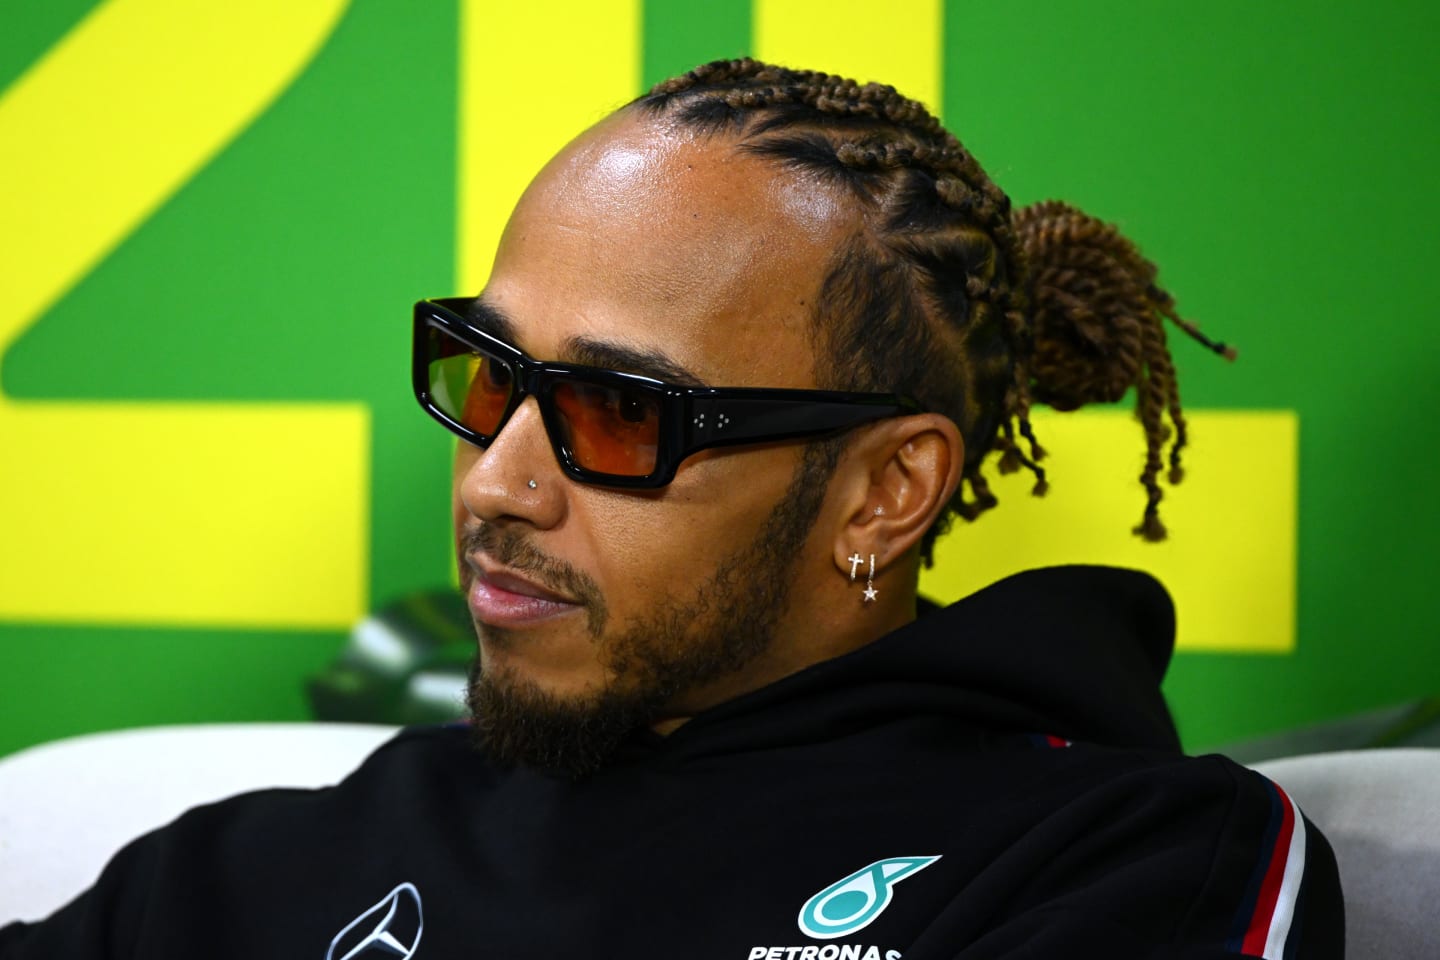 SAO PAULO, BRAZIL - NOVEMBER 02: Lewis Hamilton of Great Britain and Mercedes reacts in the Drivers